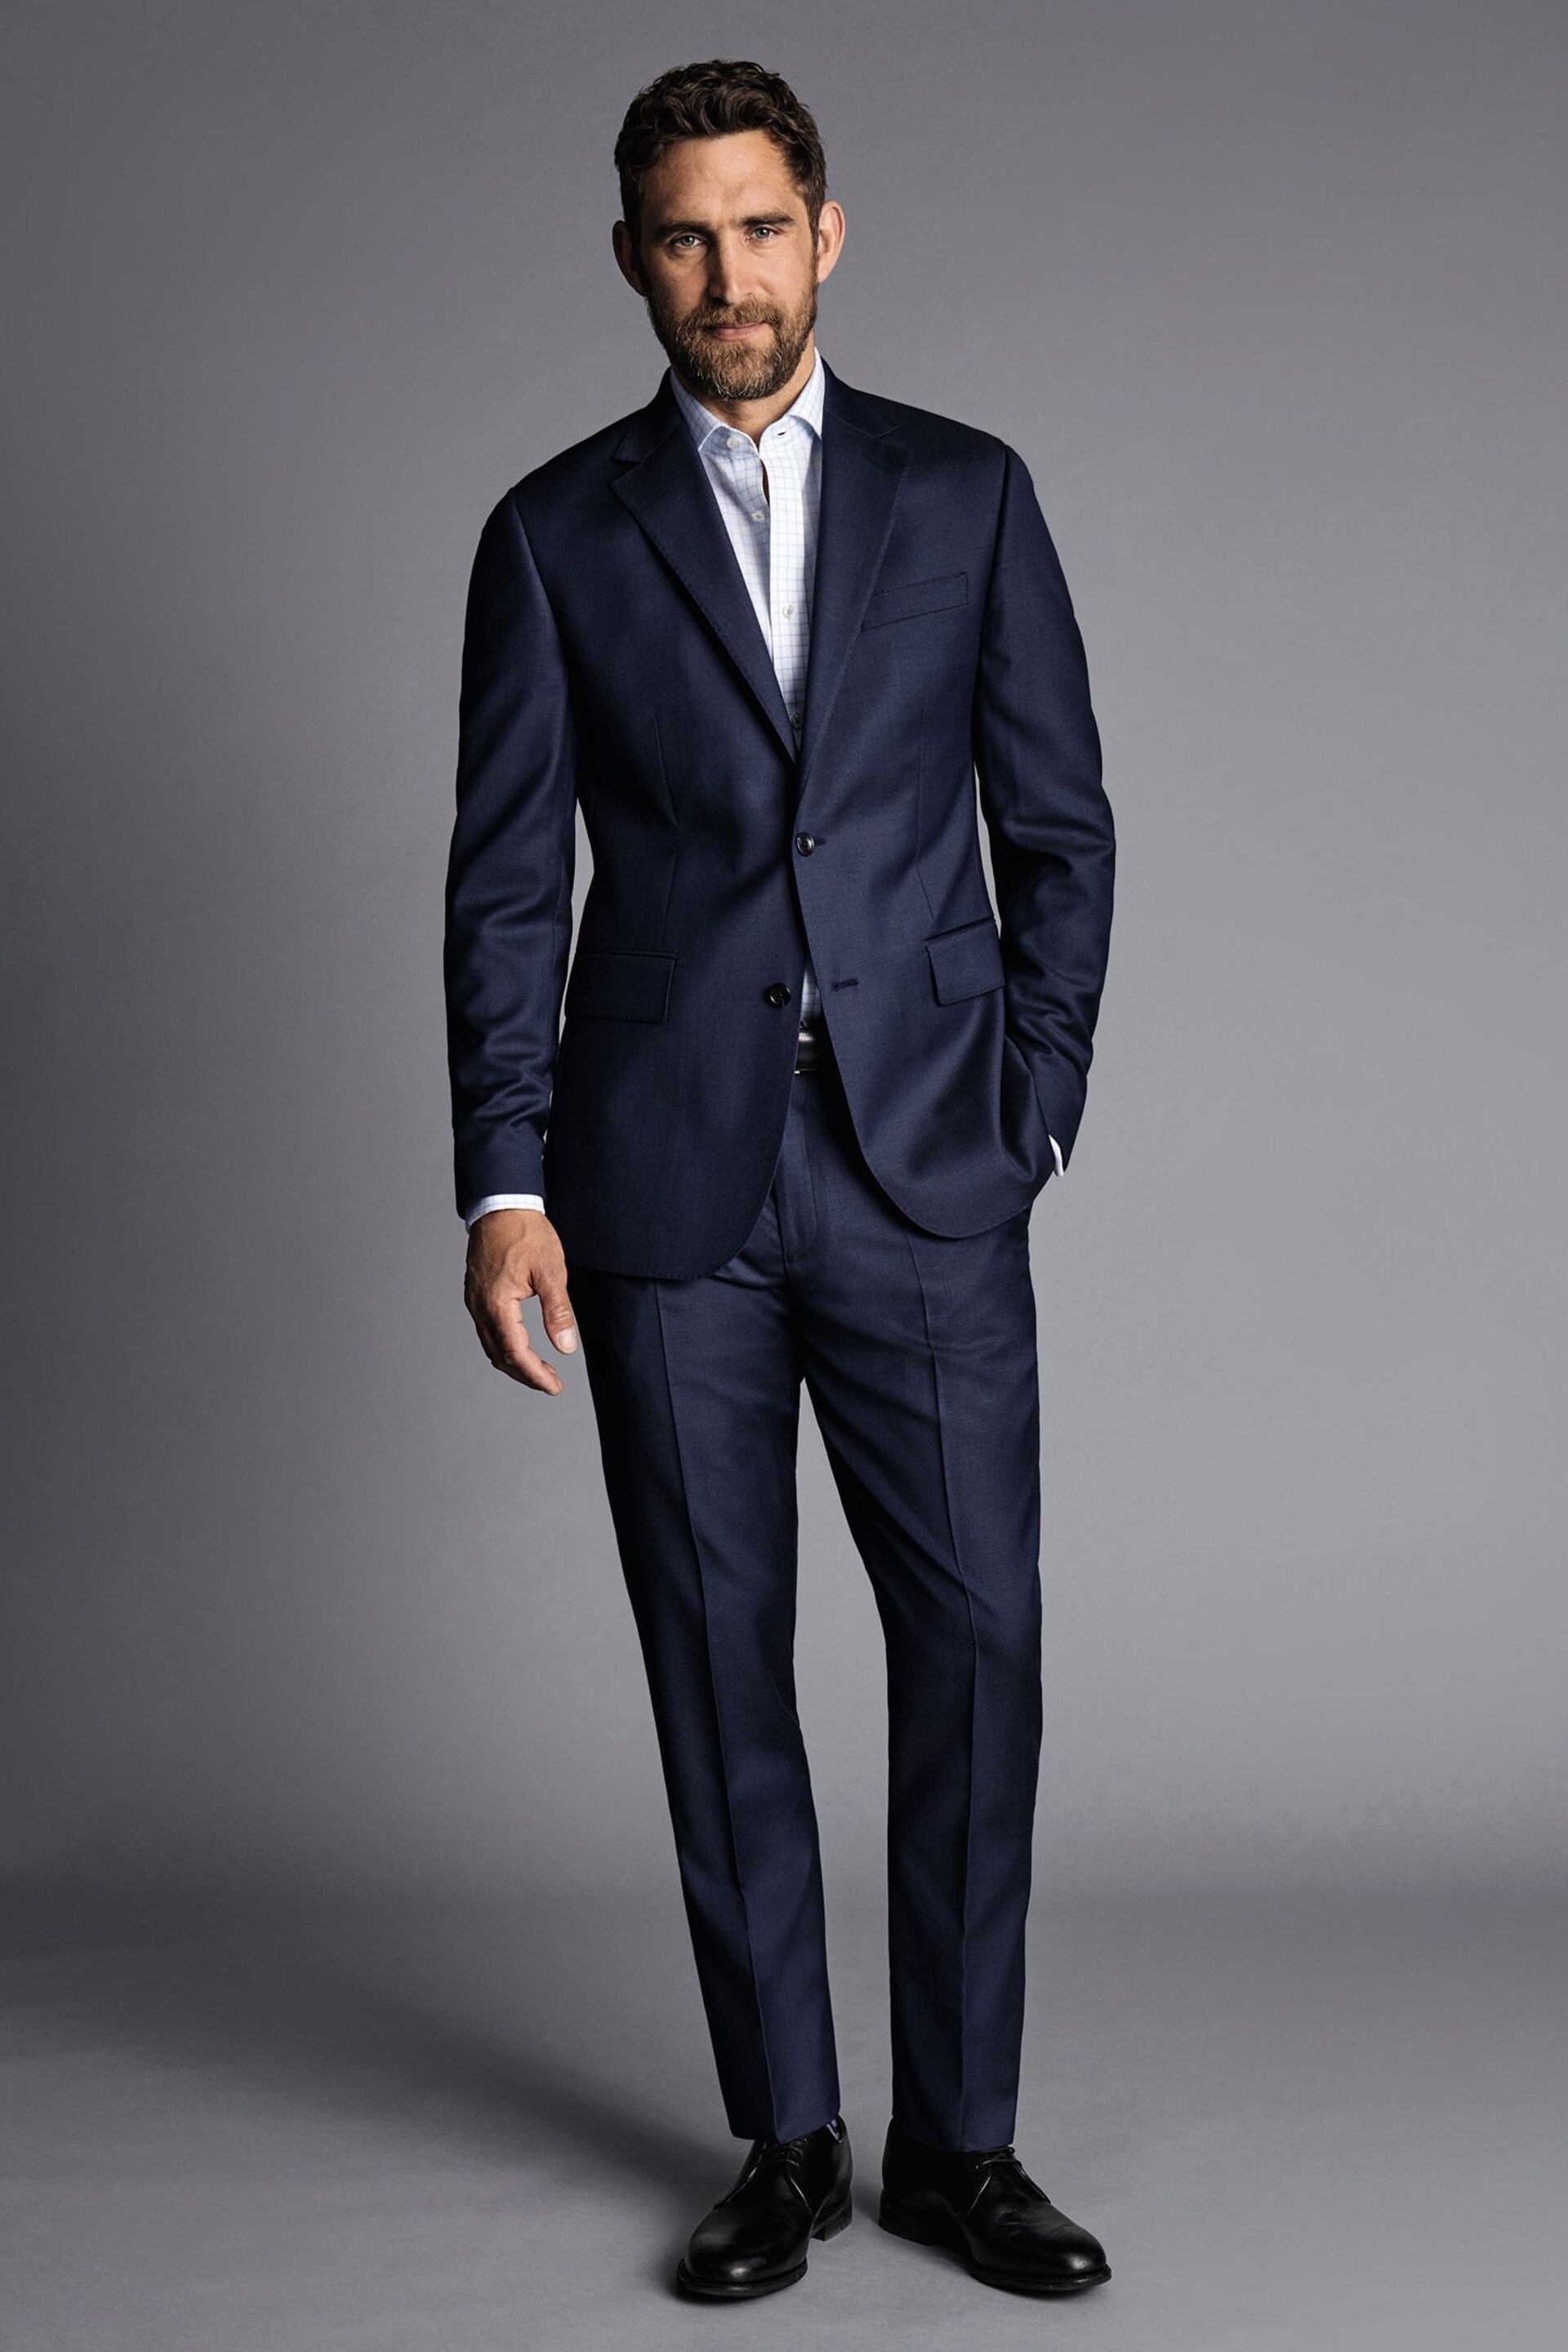 Charles Tyrwhitt Blue Slim Fit Natural Stretch Twill Suit: Jacket - Image 3 of 5